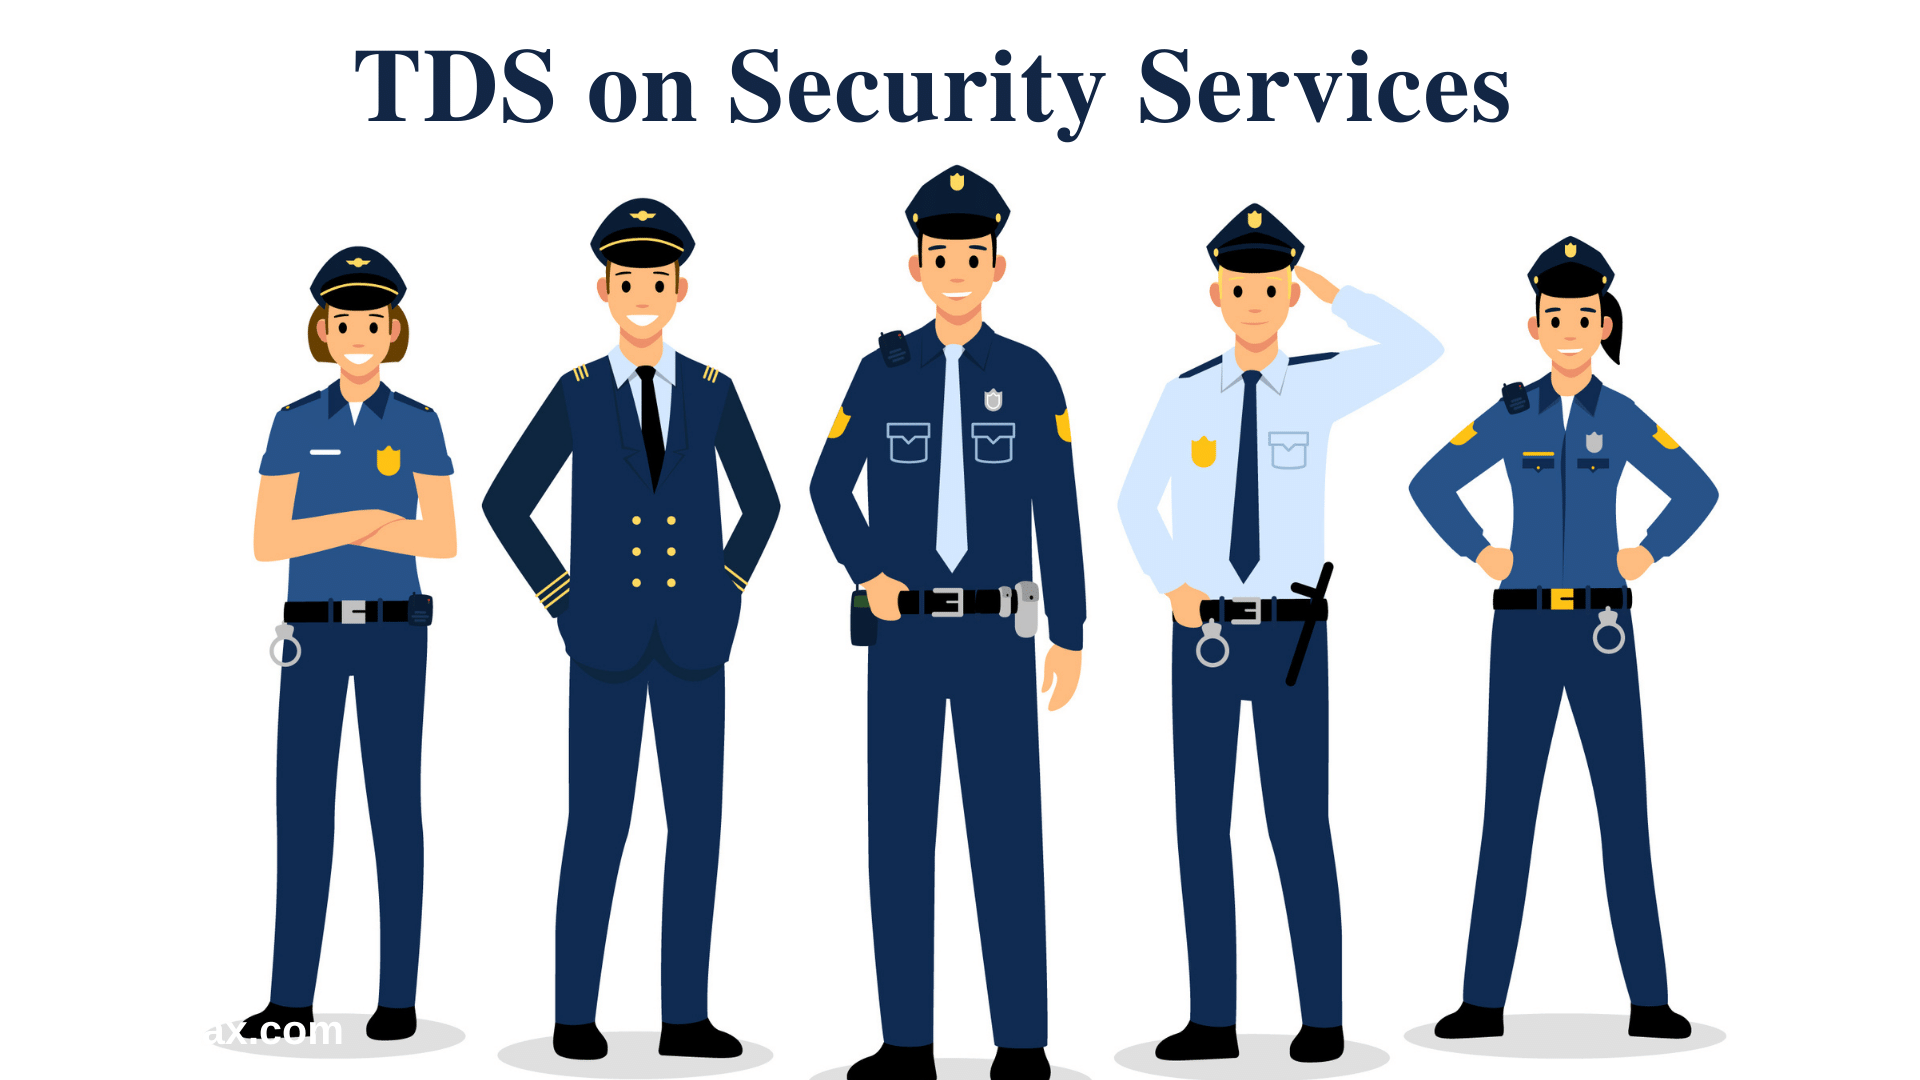 TDS on security services - Section 194C of Income Tax Act